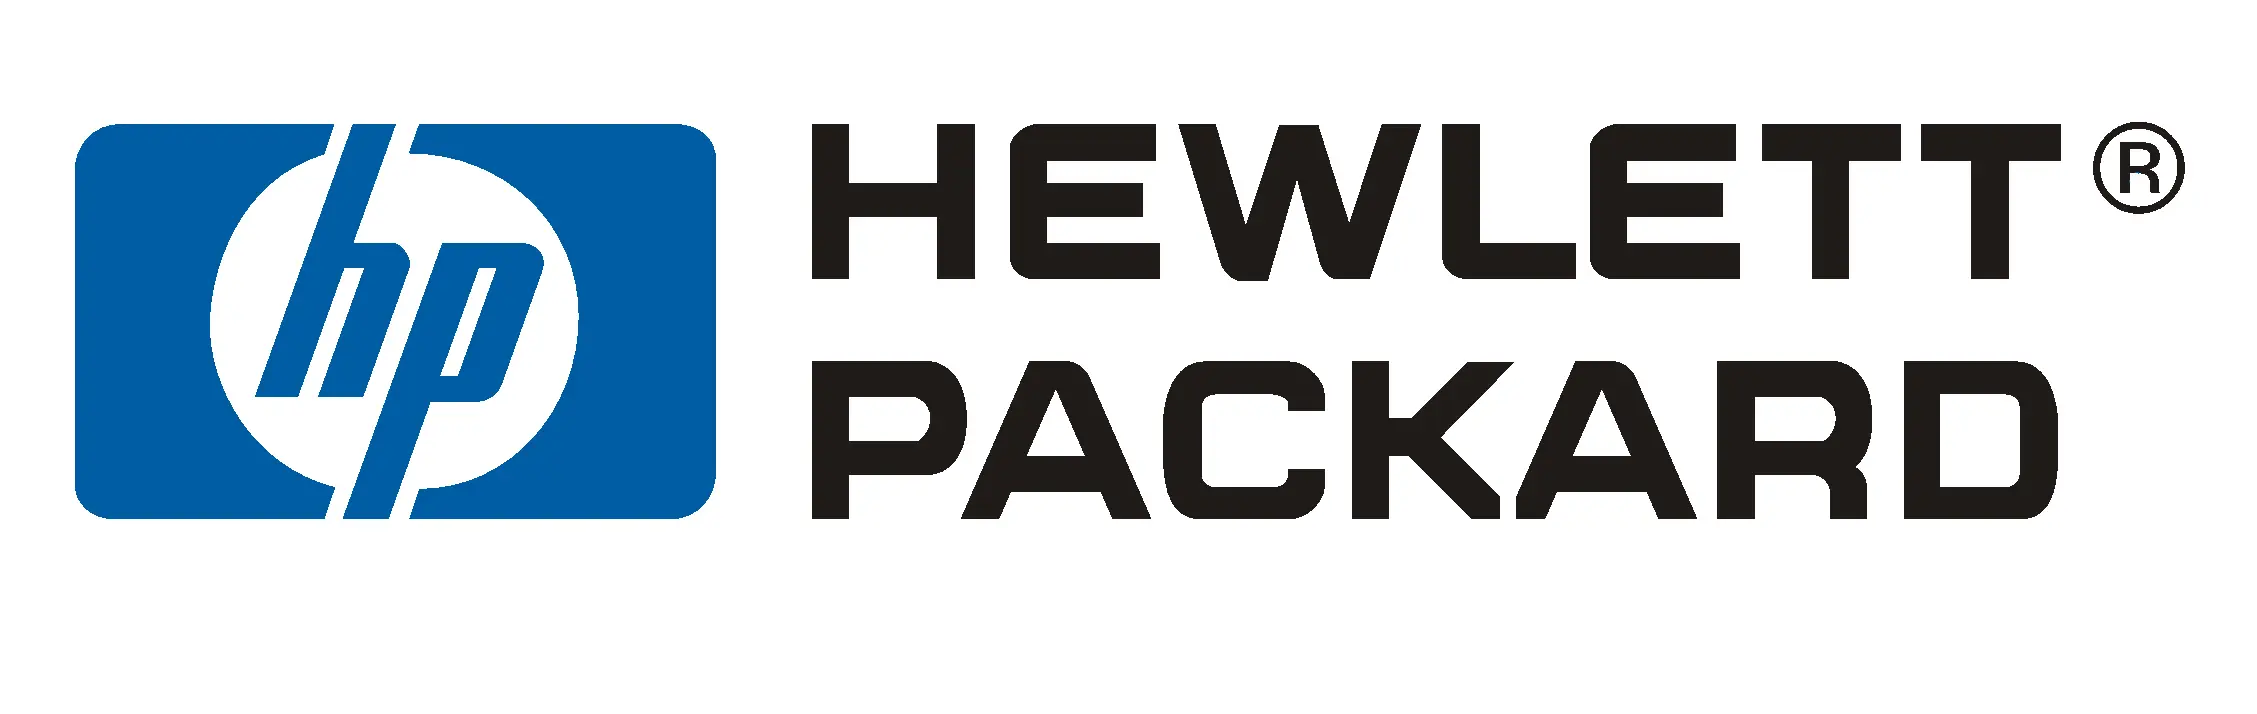 about hewlett packard - What do you know about HP products